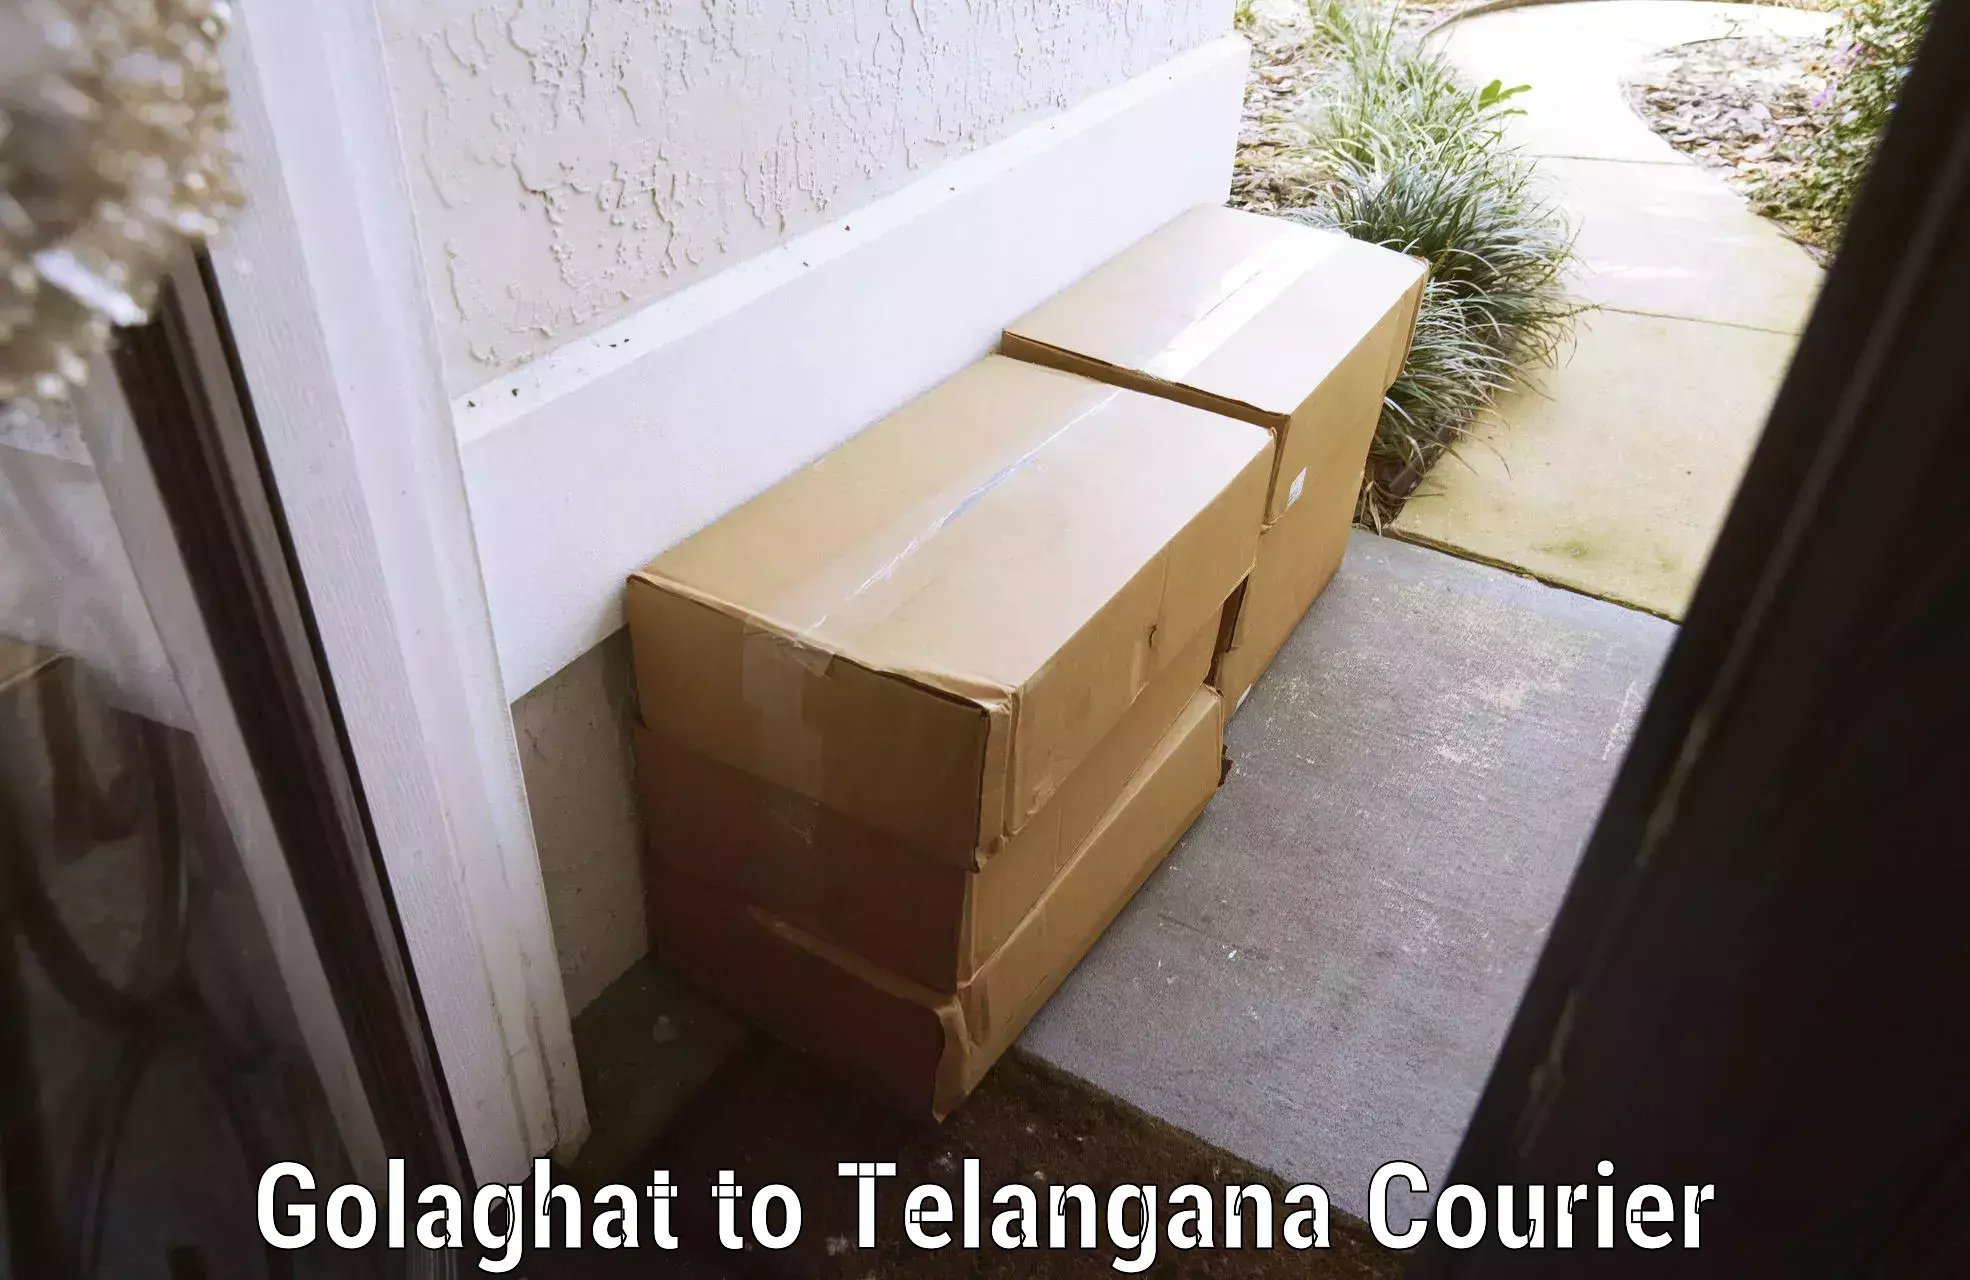 Luggage delivery app Golaghat to Manneguda